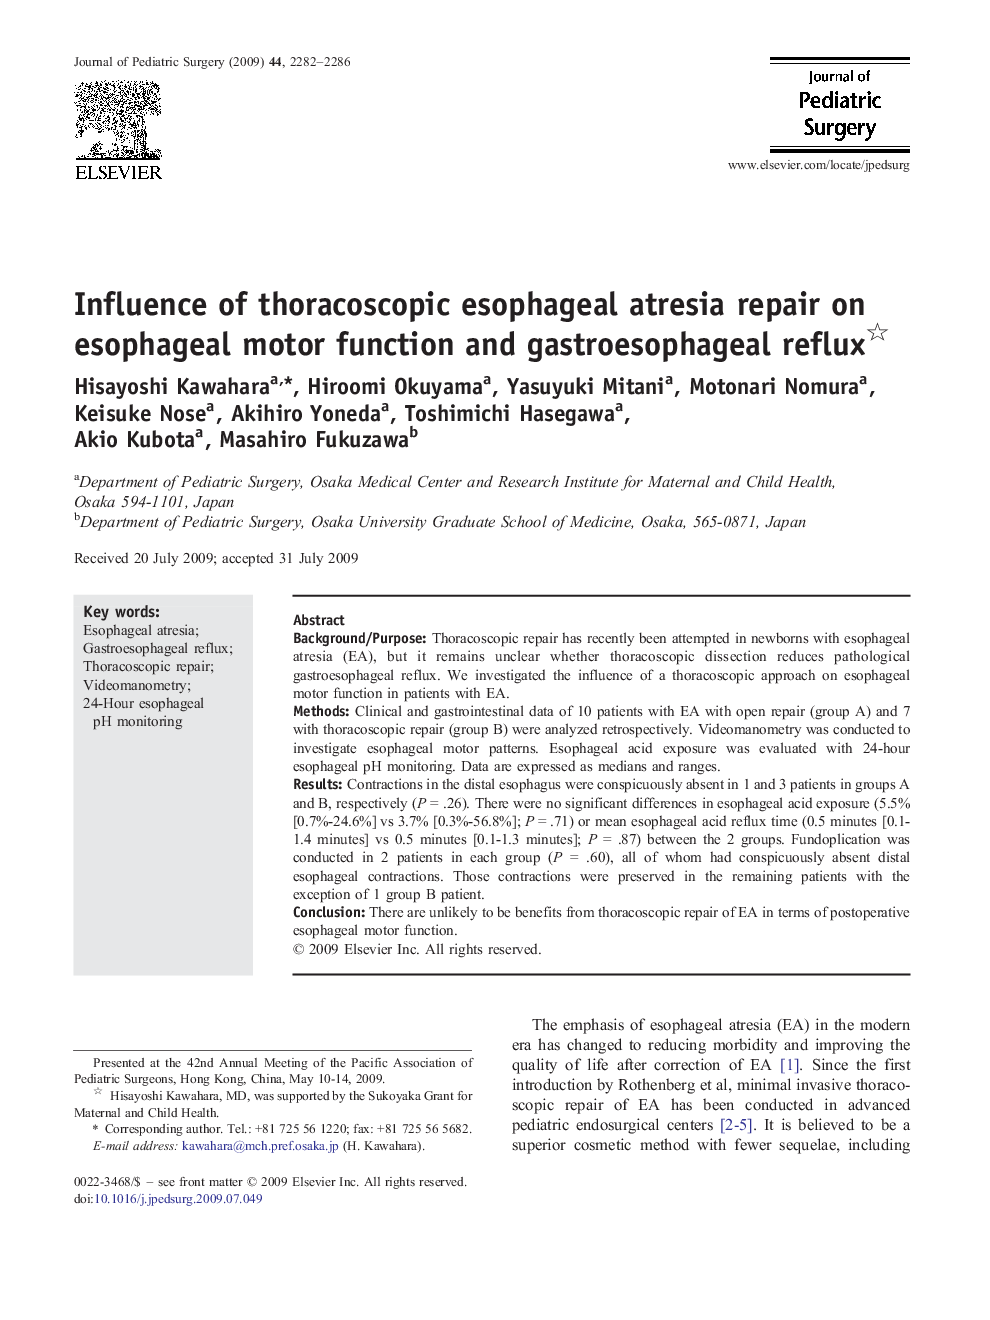 Influence of thoracoscopic esophageal atresia repair on esophageal motor function and gastroesophageal reflux 